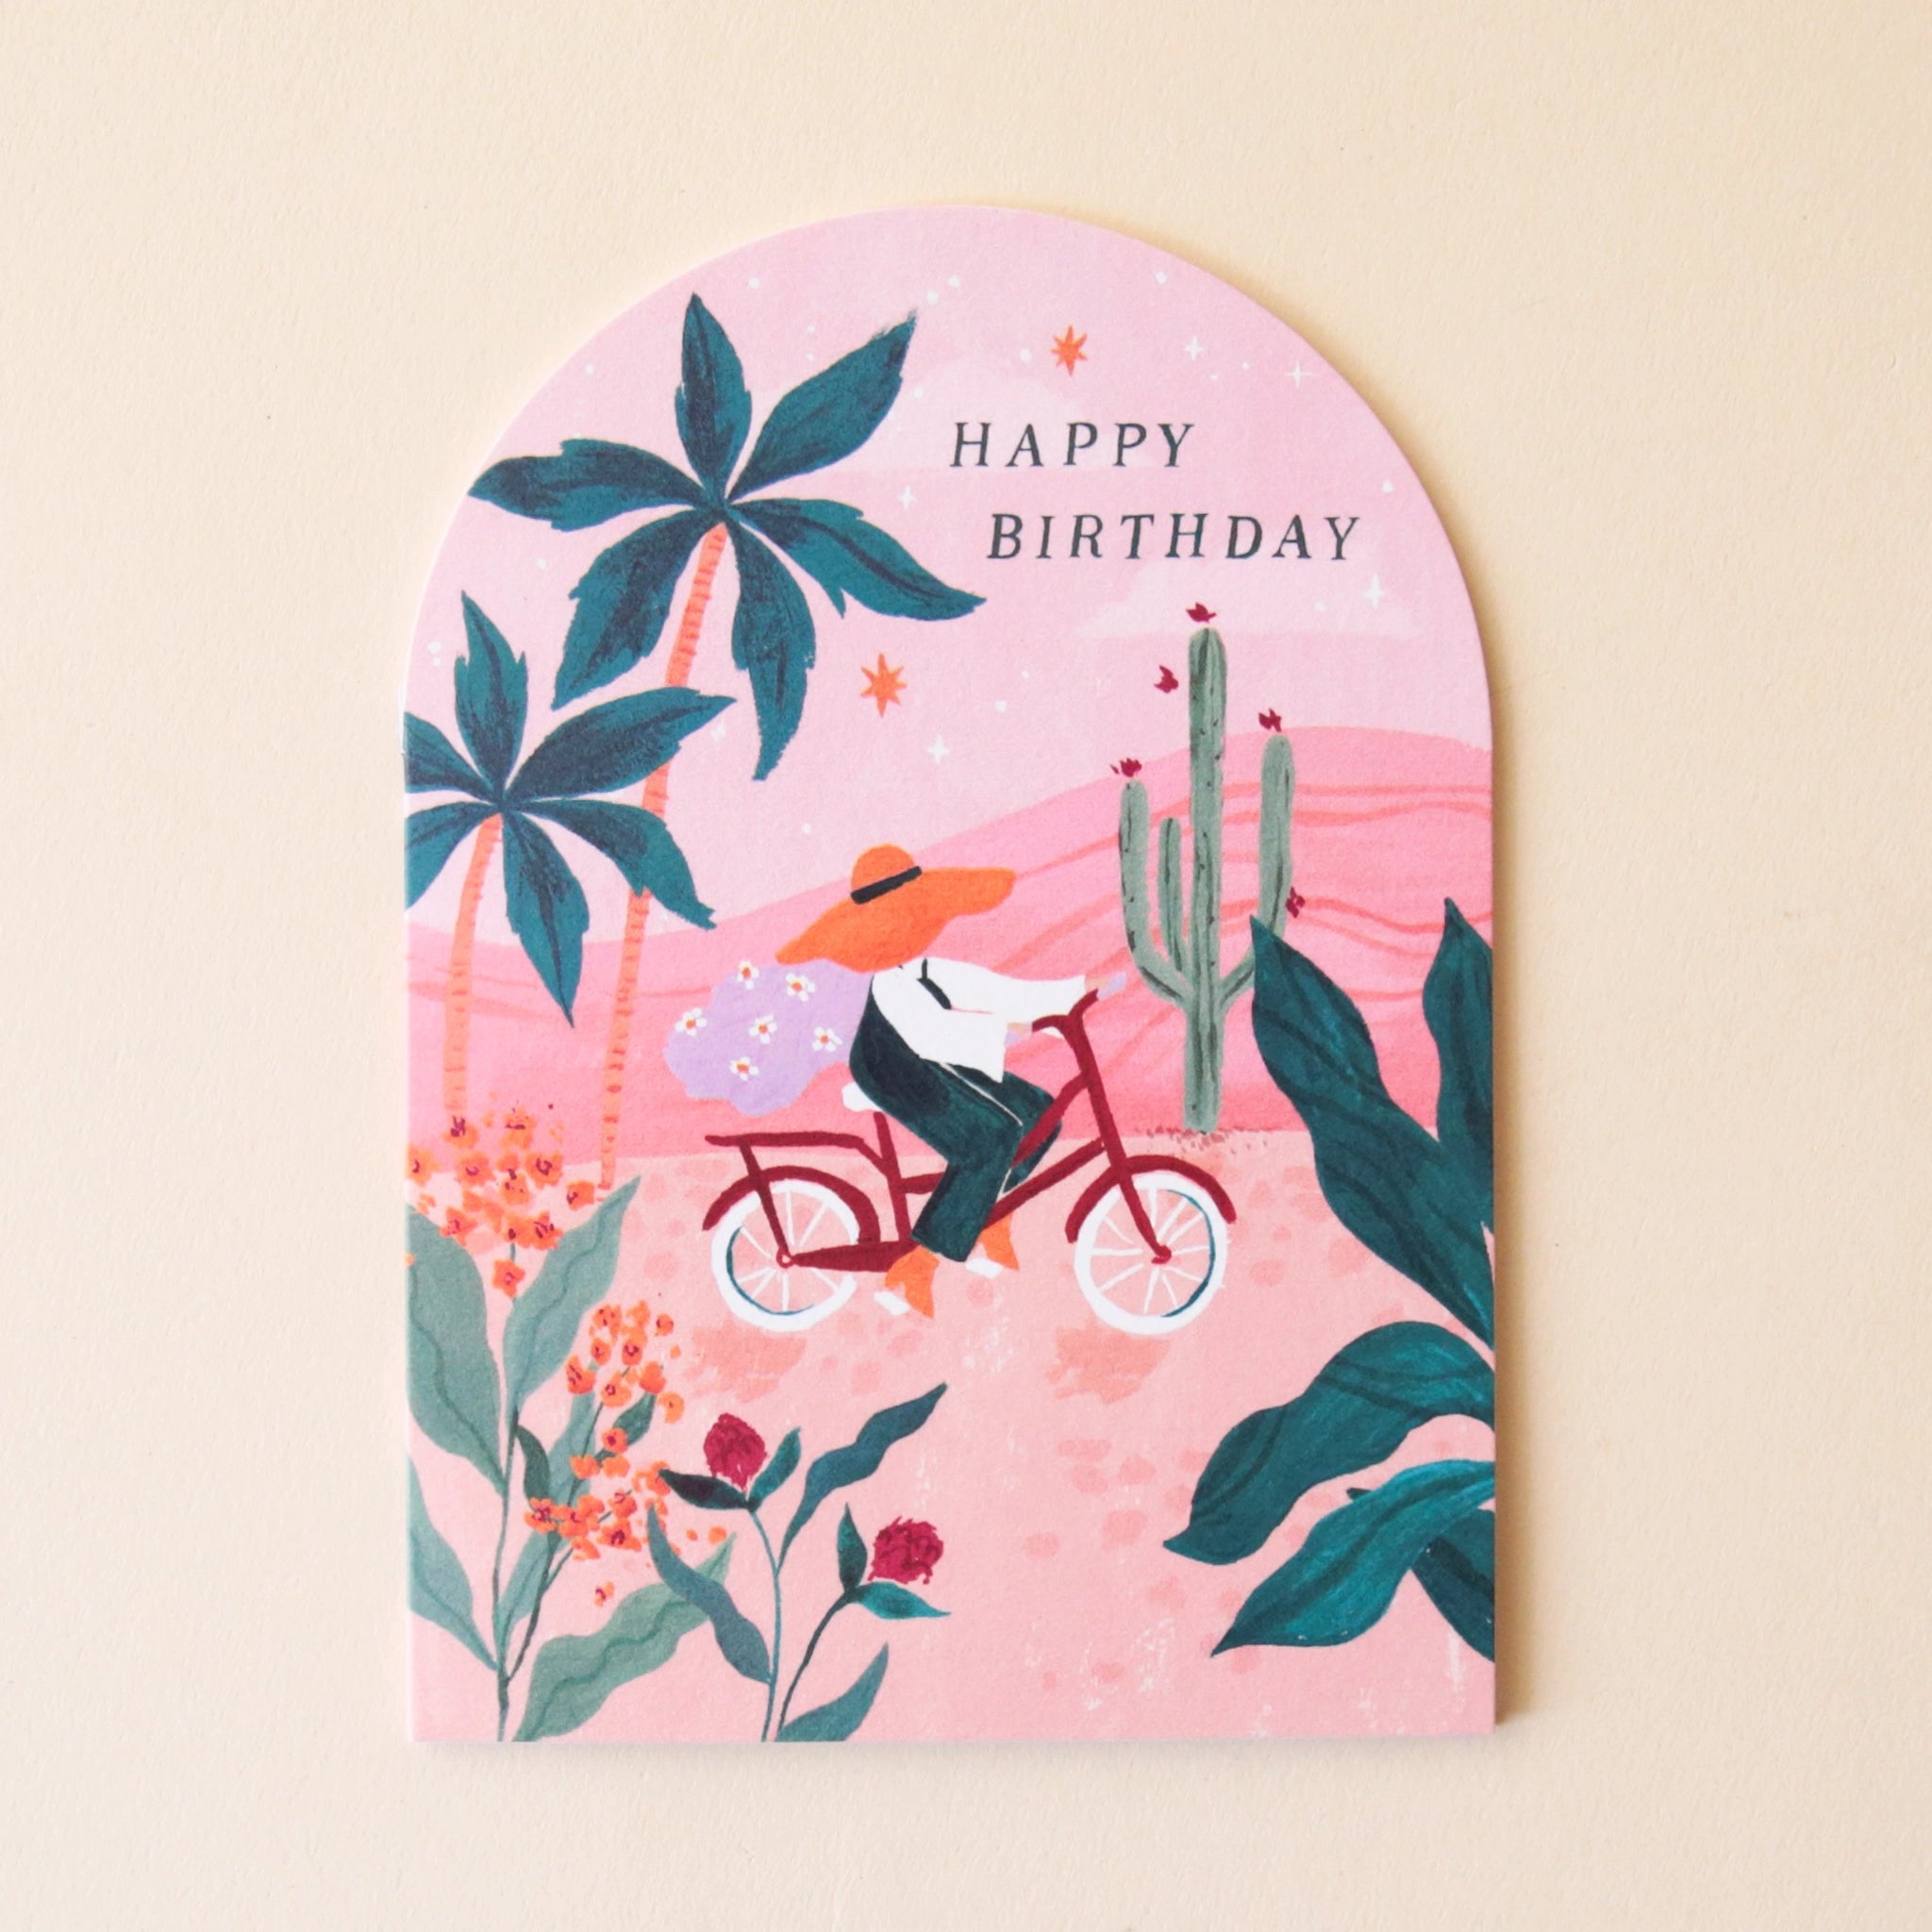 A pink arched greeting card with beautiful illustrations of palm trees, cacti and florals along with someone riding their red bicycle through the foliage along with text that reads, "Happy Birthday".